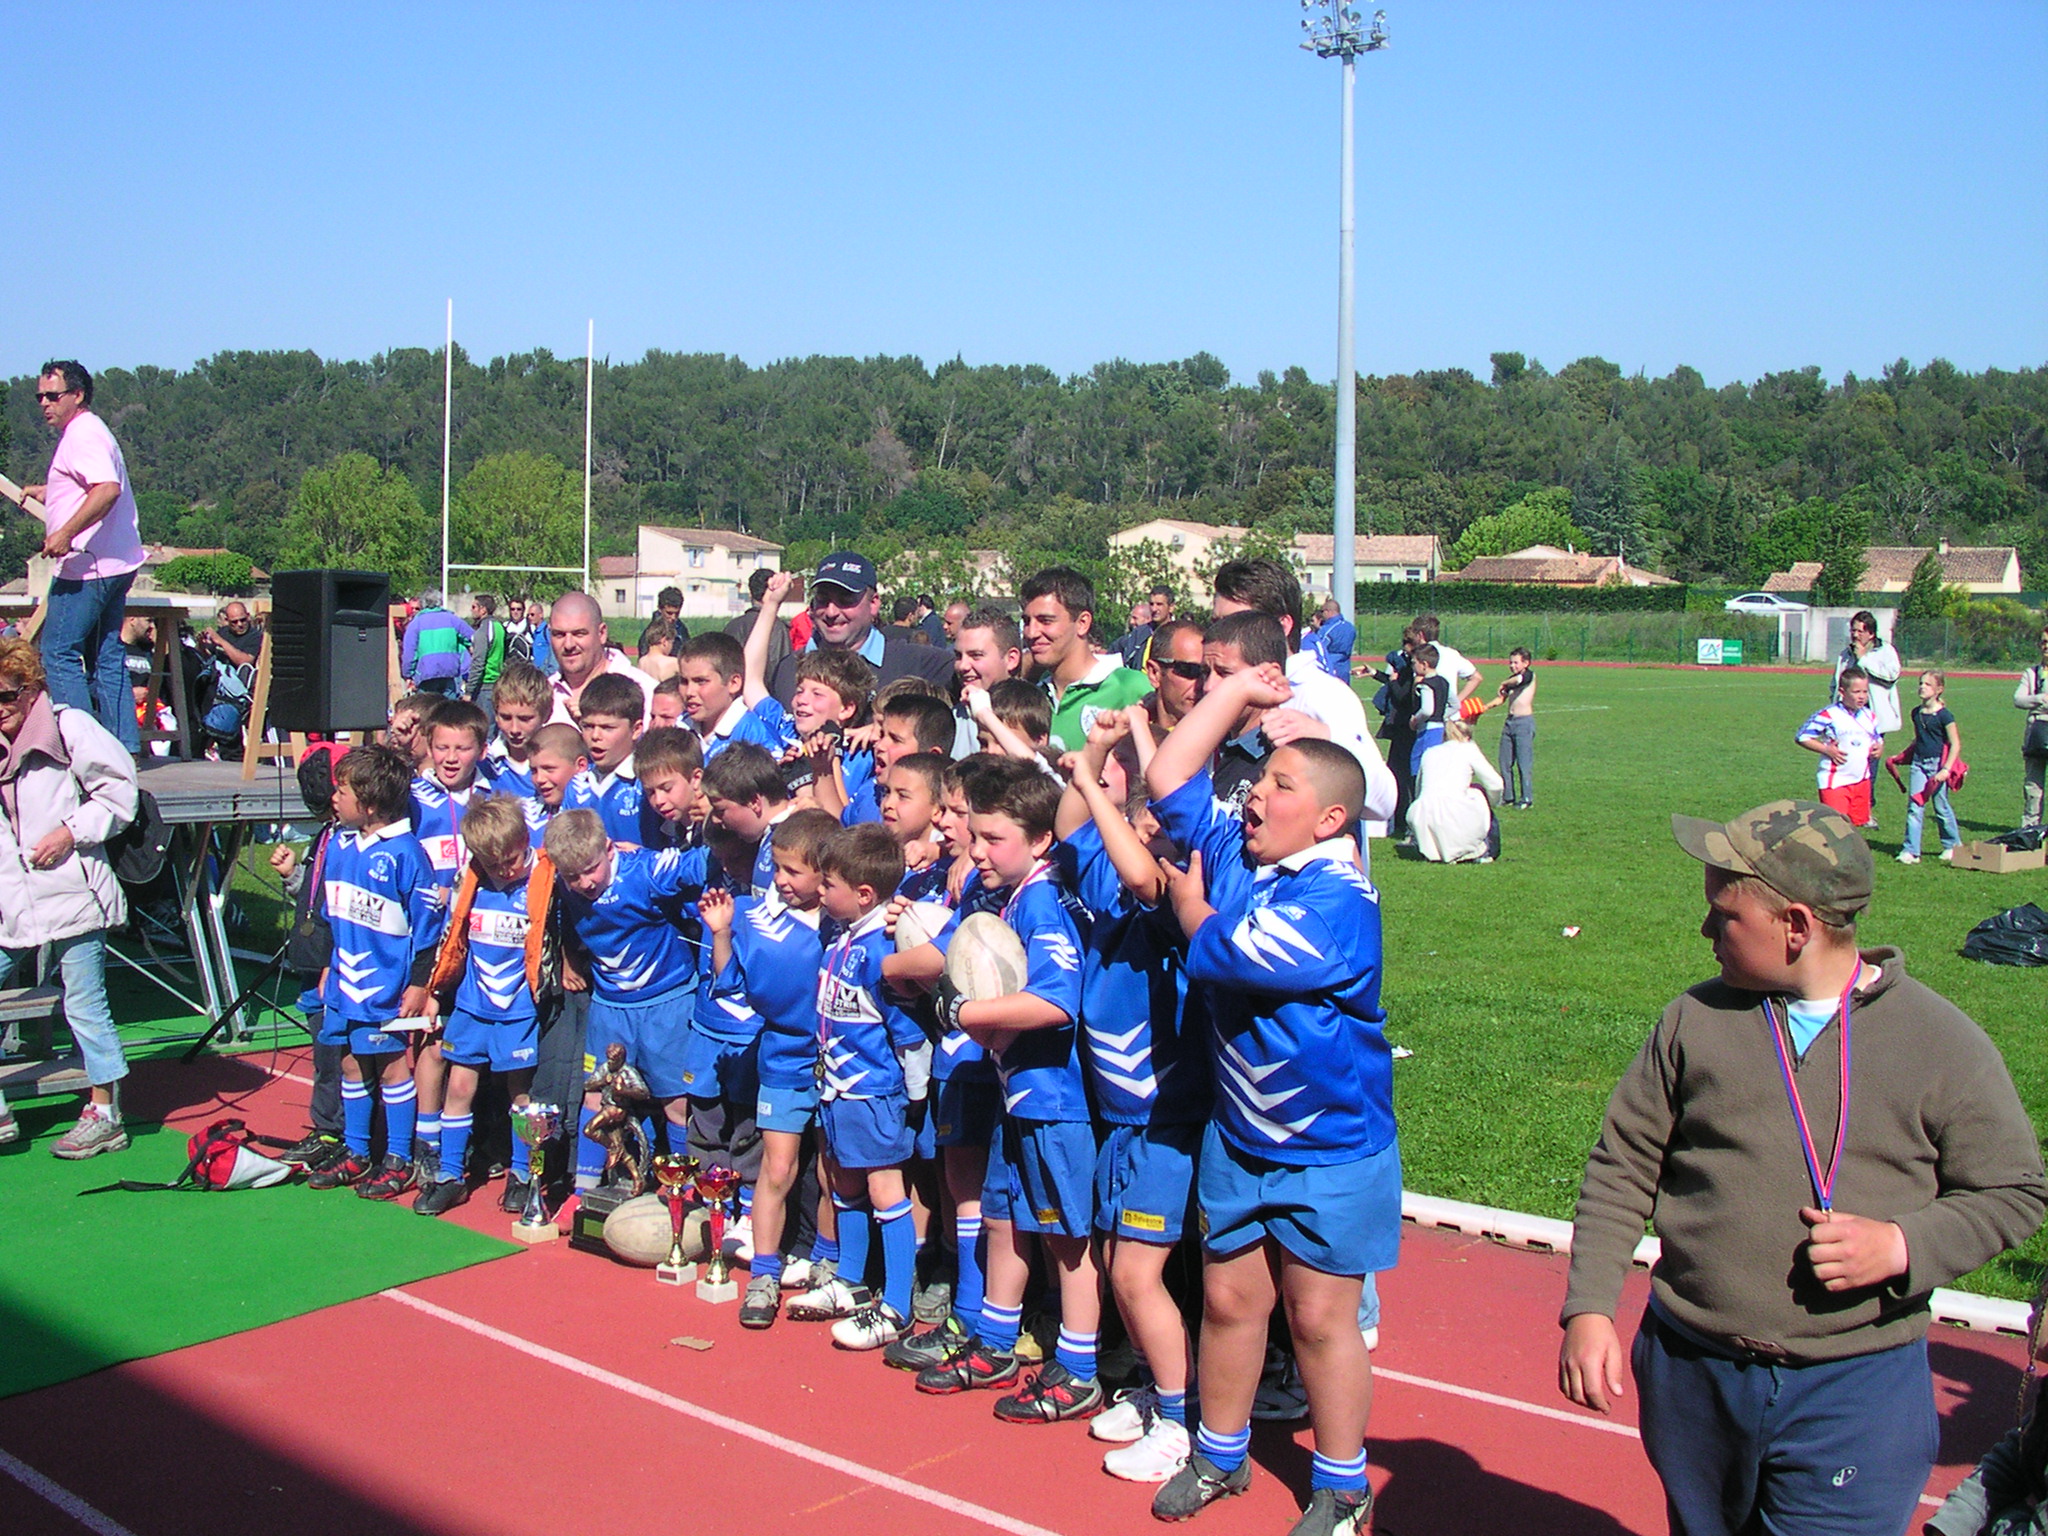 group of children at soccer game having trophy show